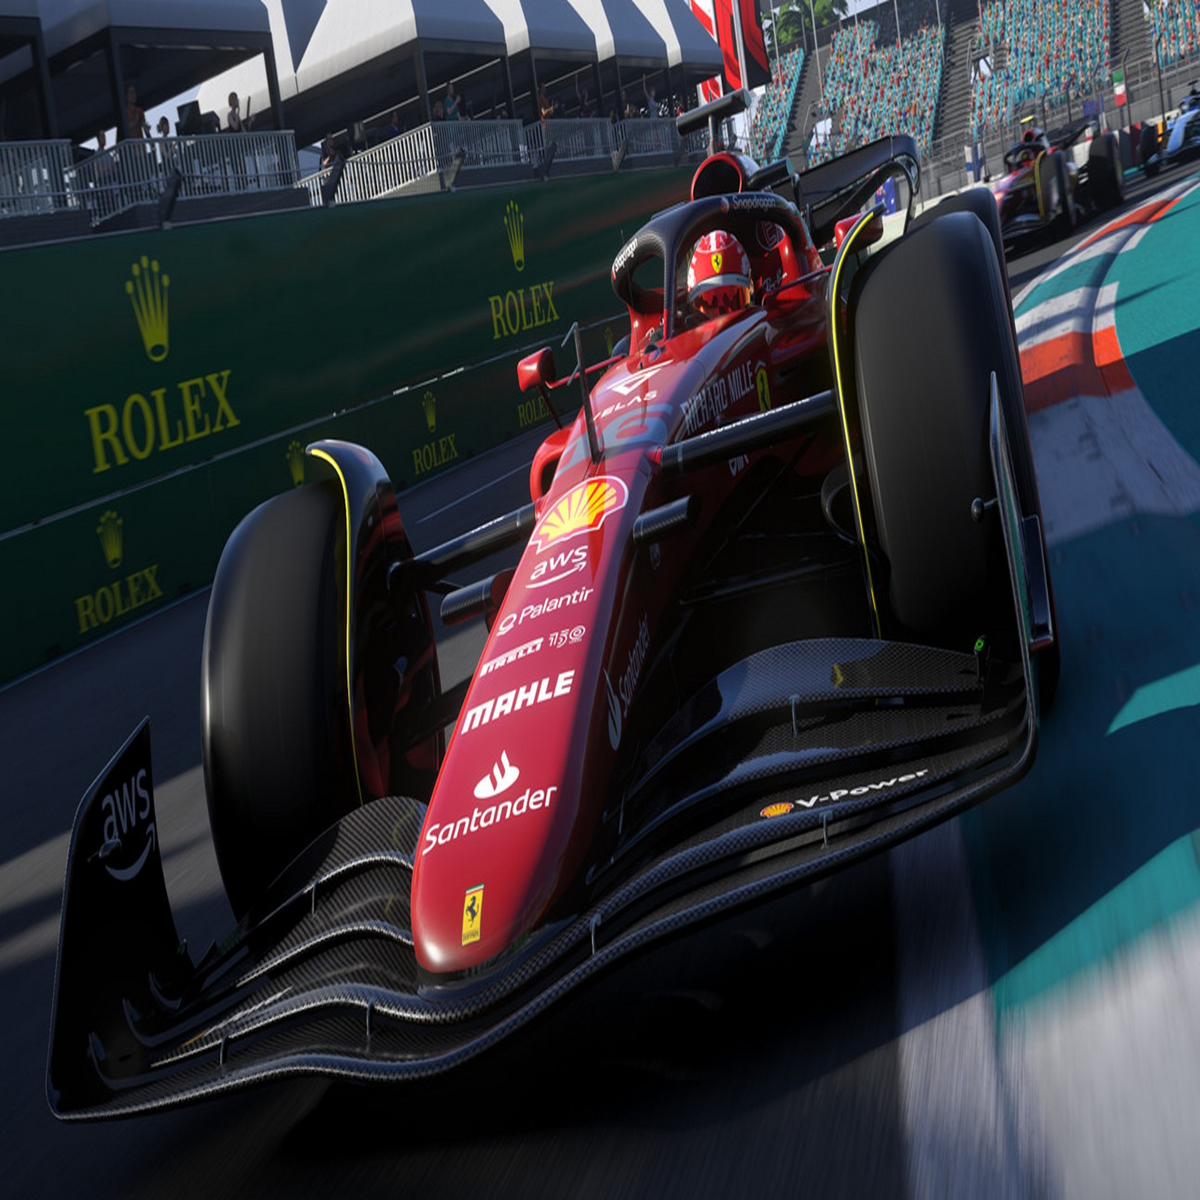 F1 22 can be preloaded as of today